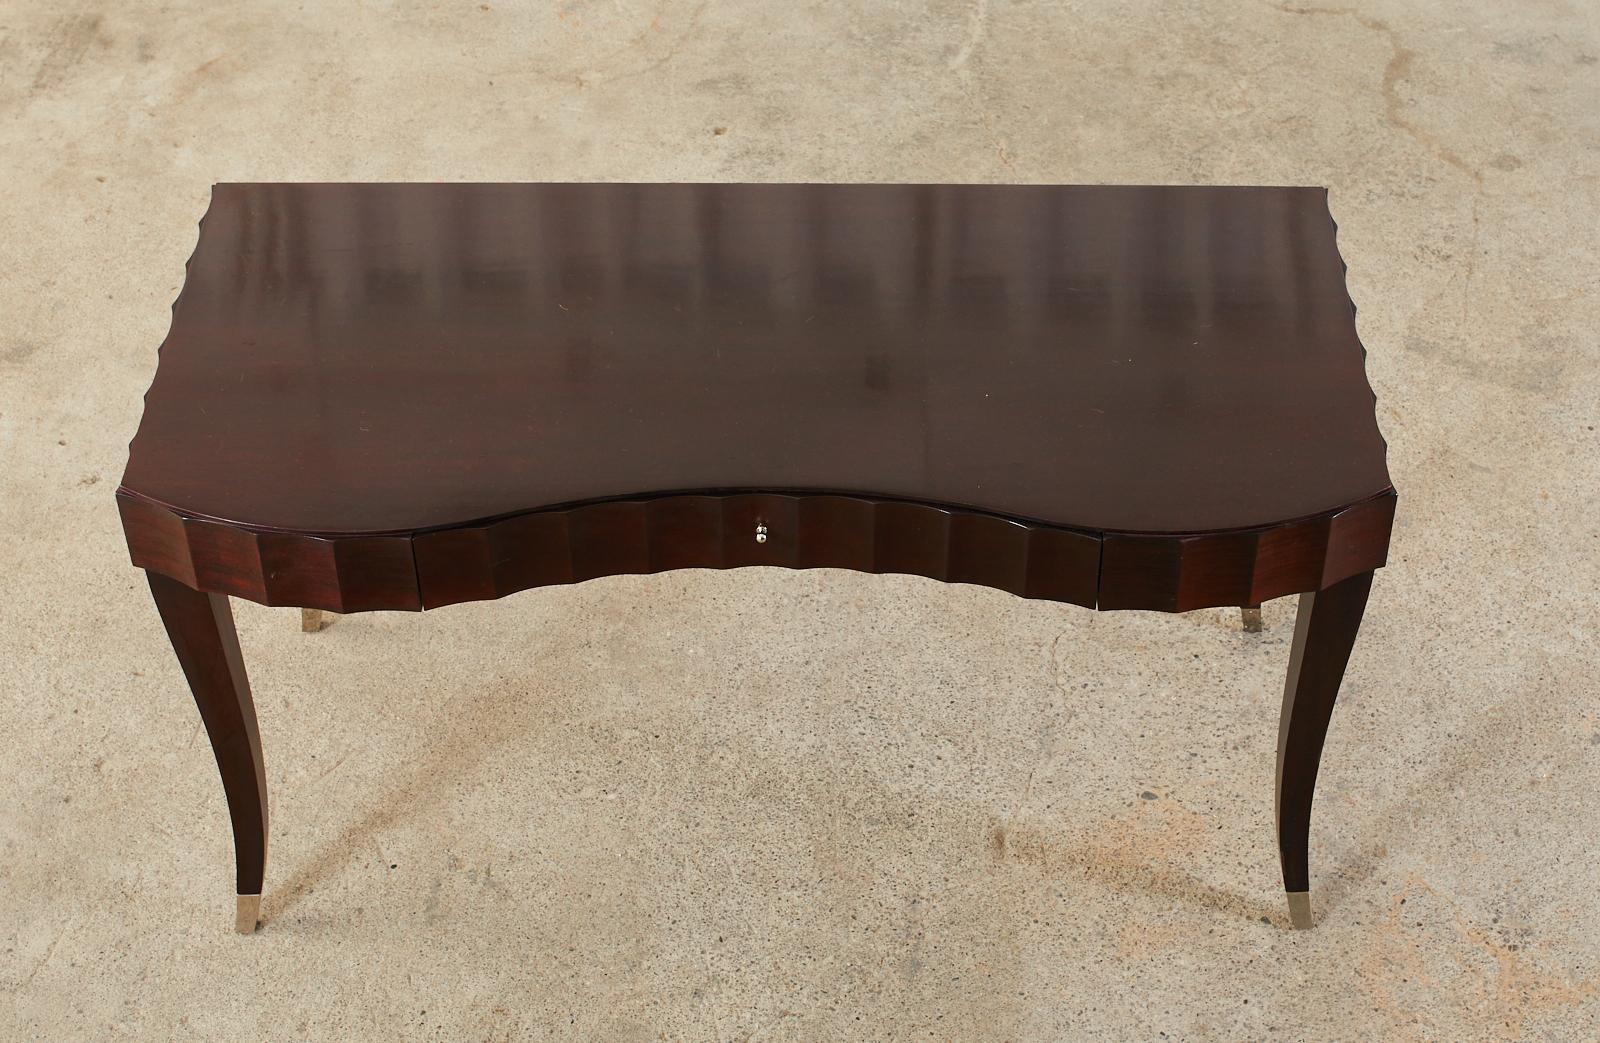 Lacquered Barbara Barry for Baker Art Deco Style Writing Desk